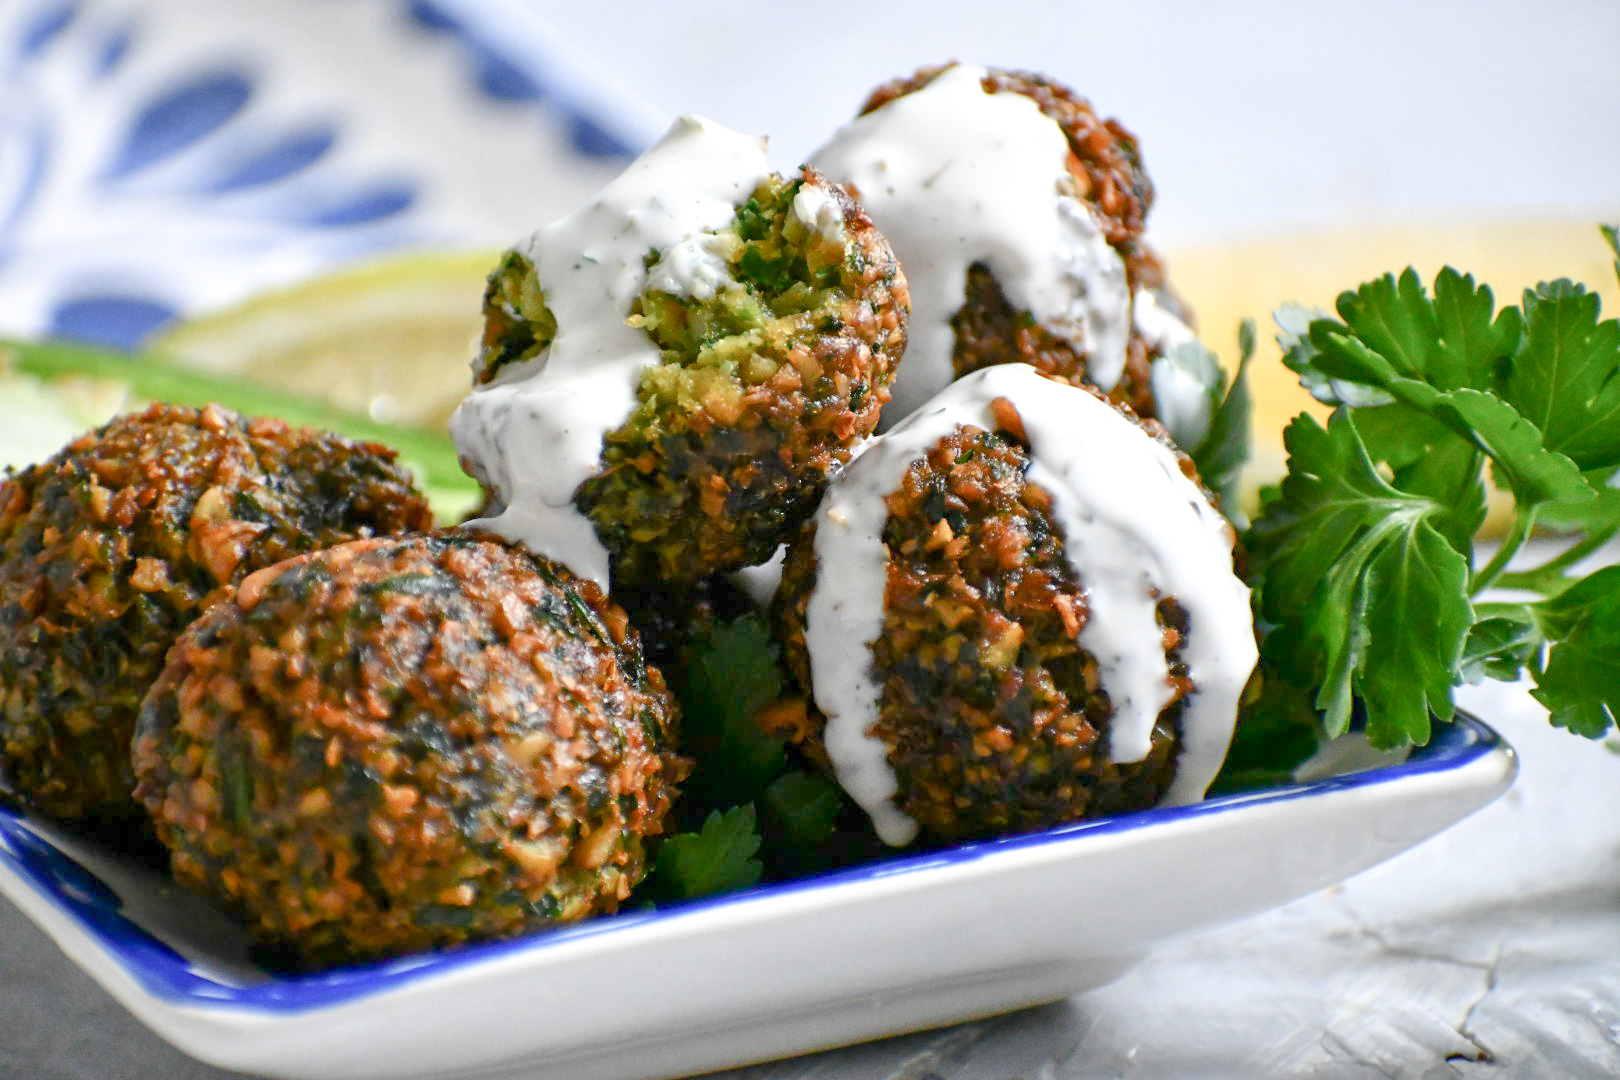 Homemade Falafel - Cooking With Ayeh